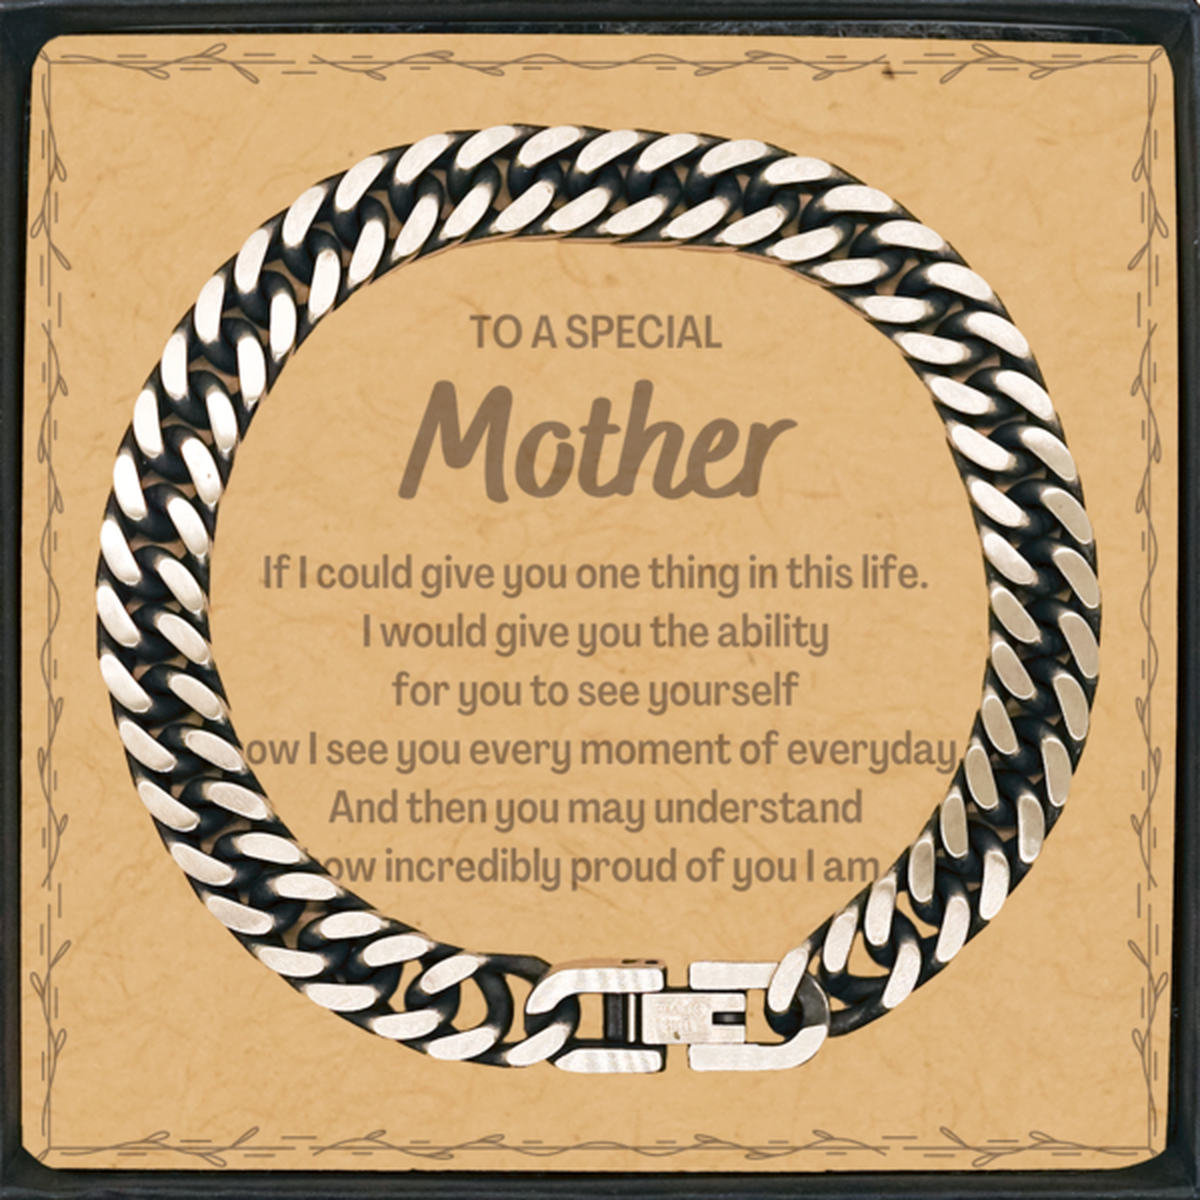 To My Mother Cuban Link Chain Bracelet, Gifts For Mother Message Card, Inspirational Gifts for Christmas Birthday, Epic Gifts for Mother To A Special Mother how incredibly proud of you I am